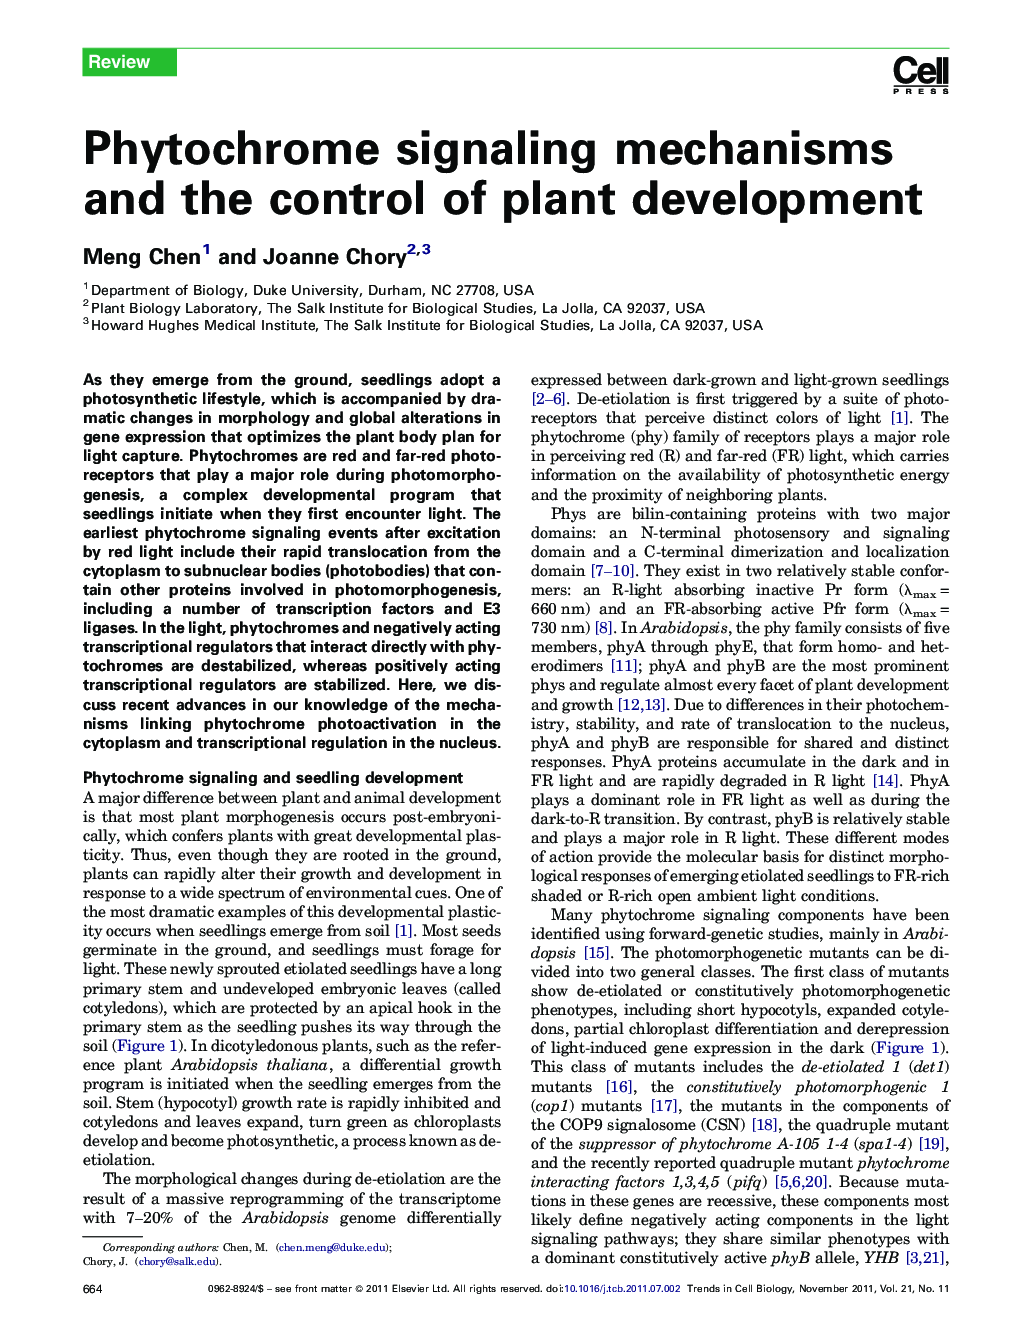 Phytochrome signaling mechanisms and the control of plant development